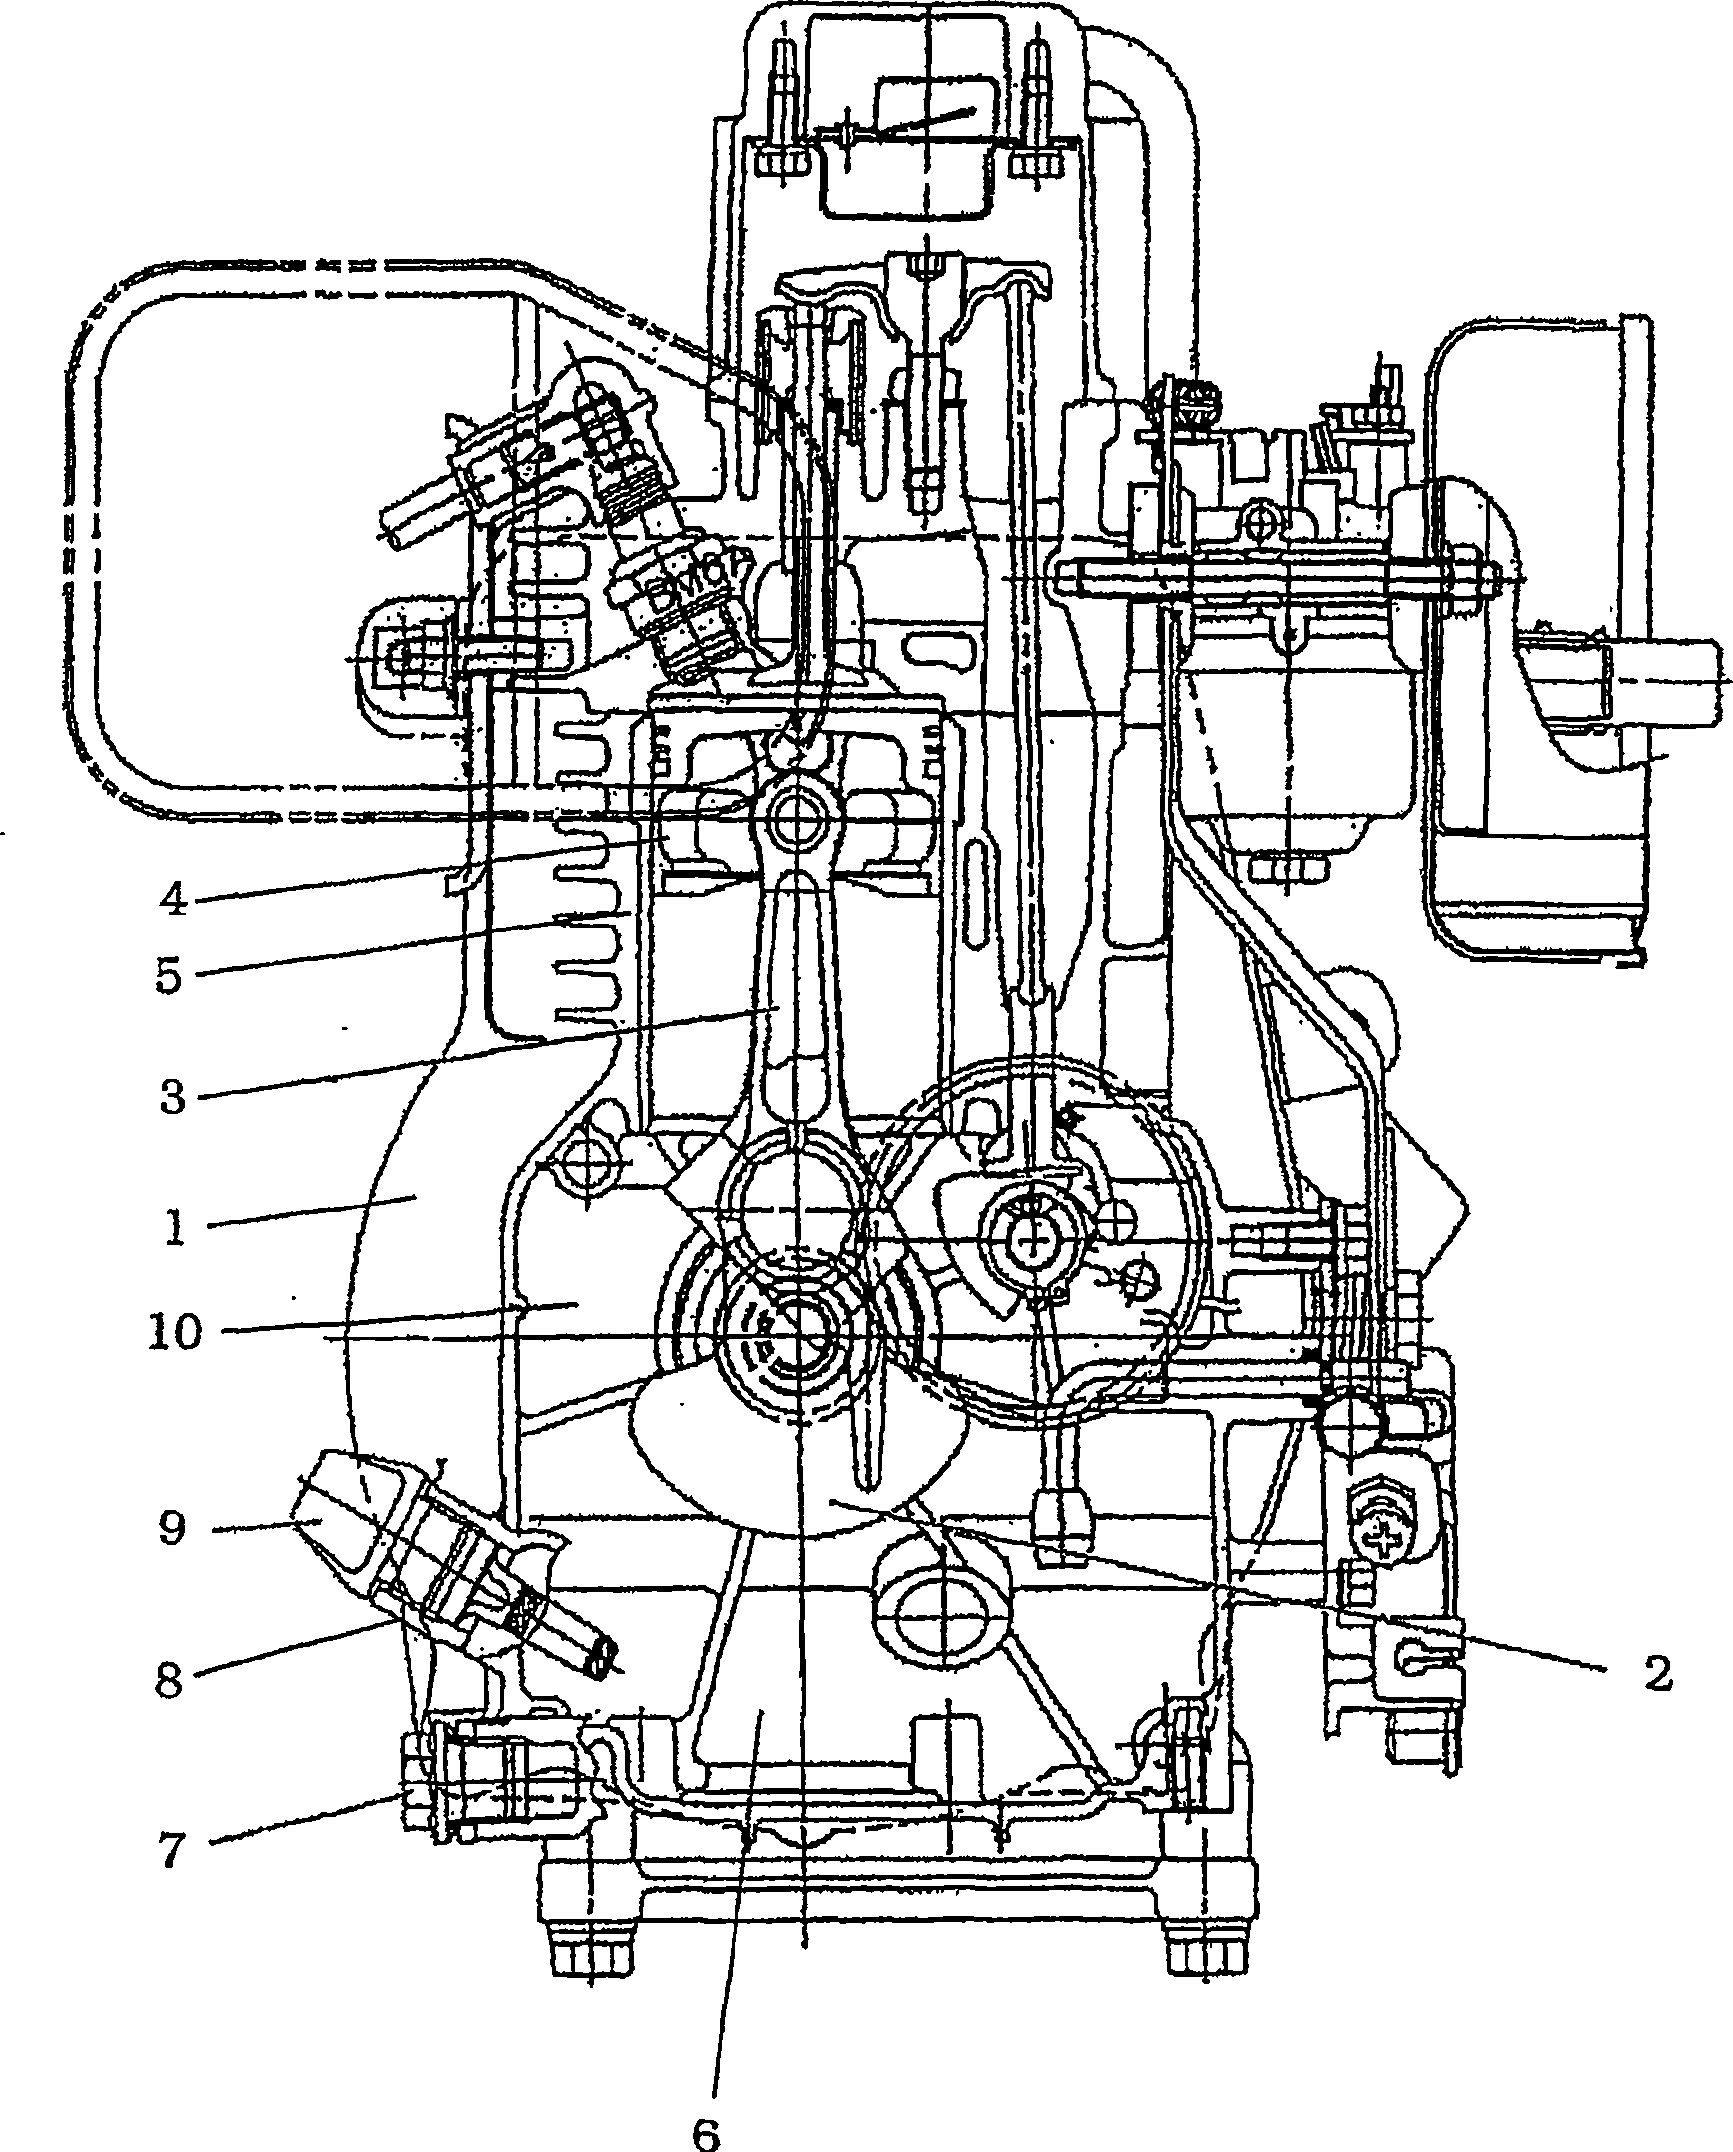 Oil level monitoring system for an internal combustion engine